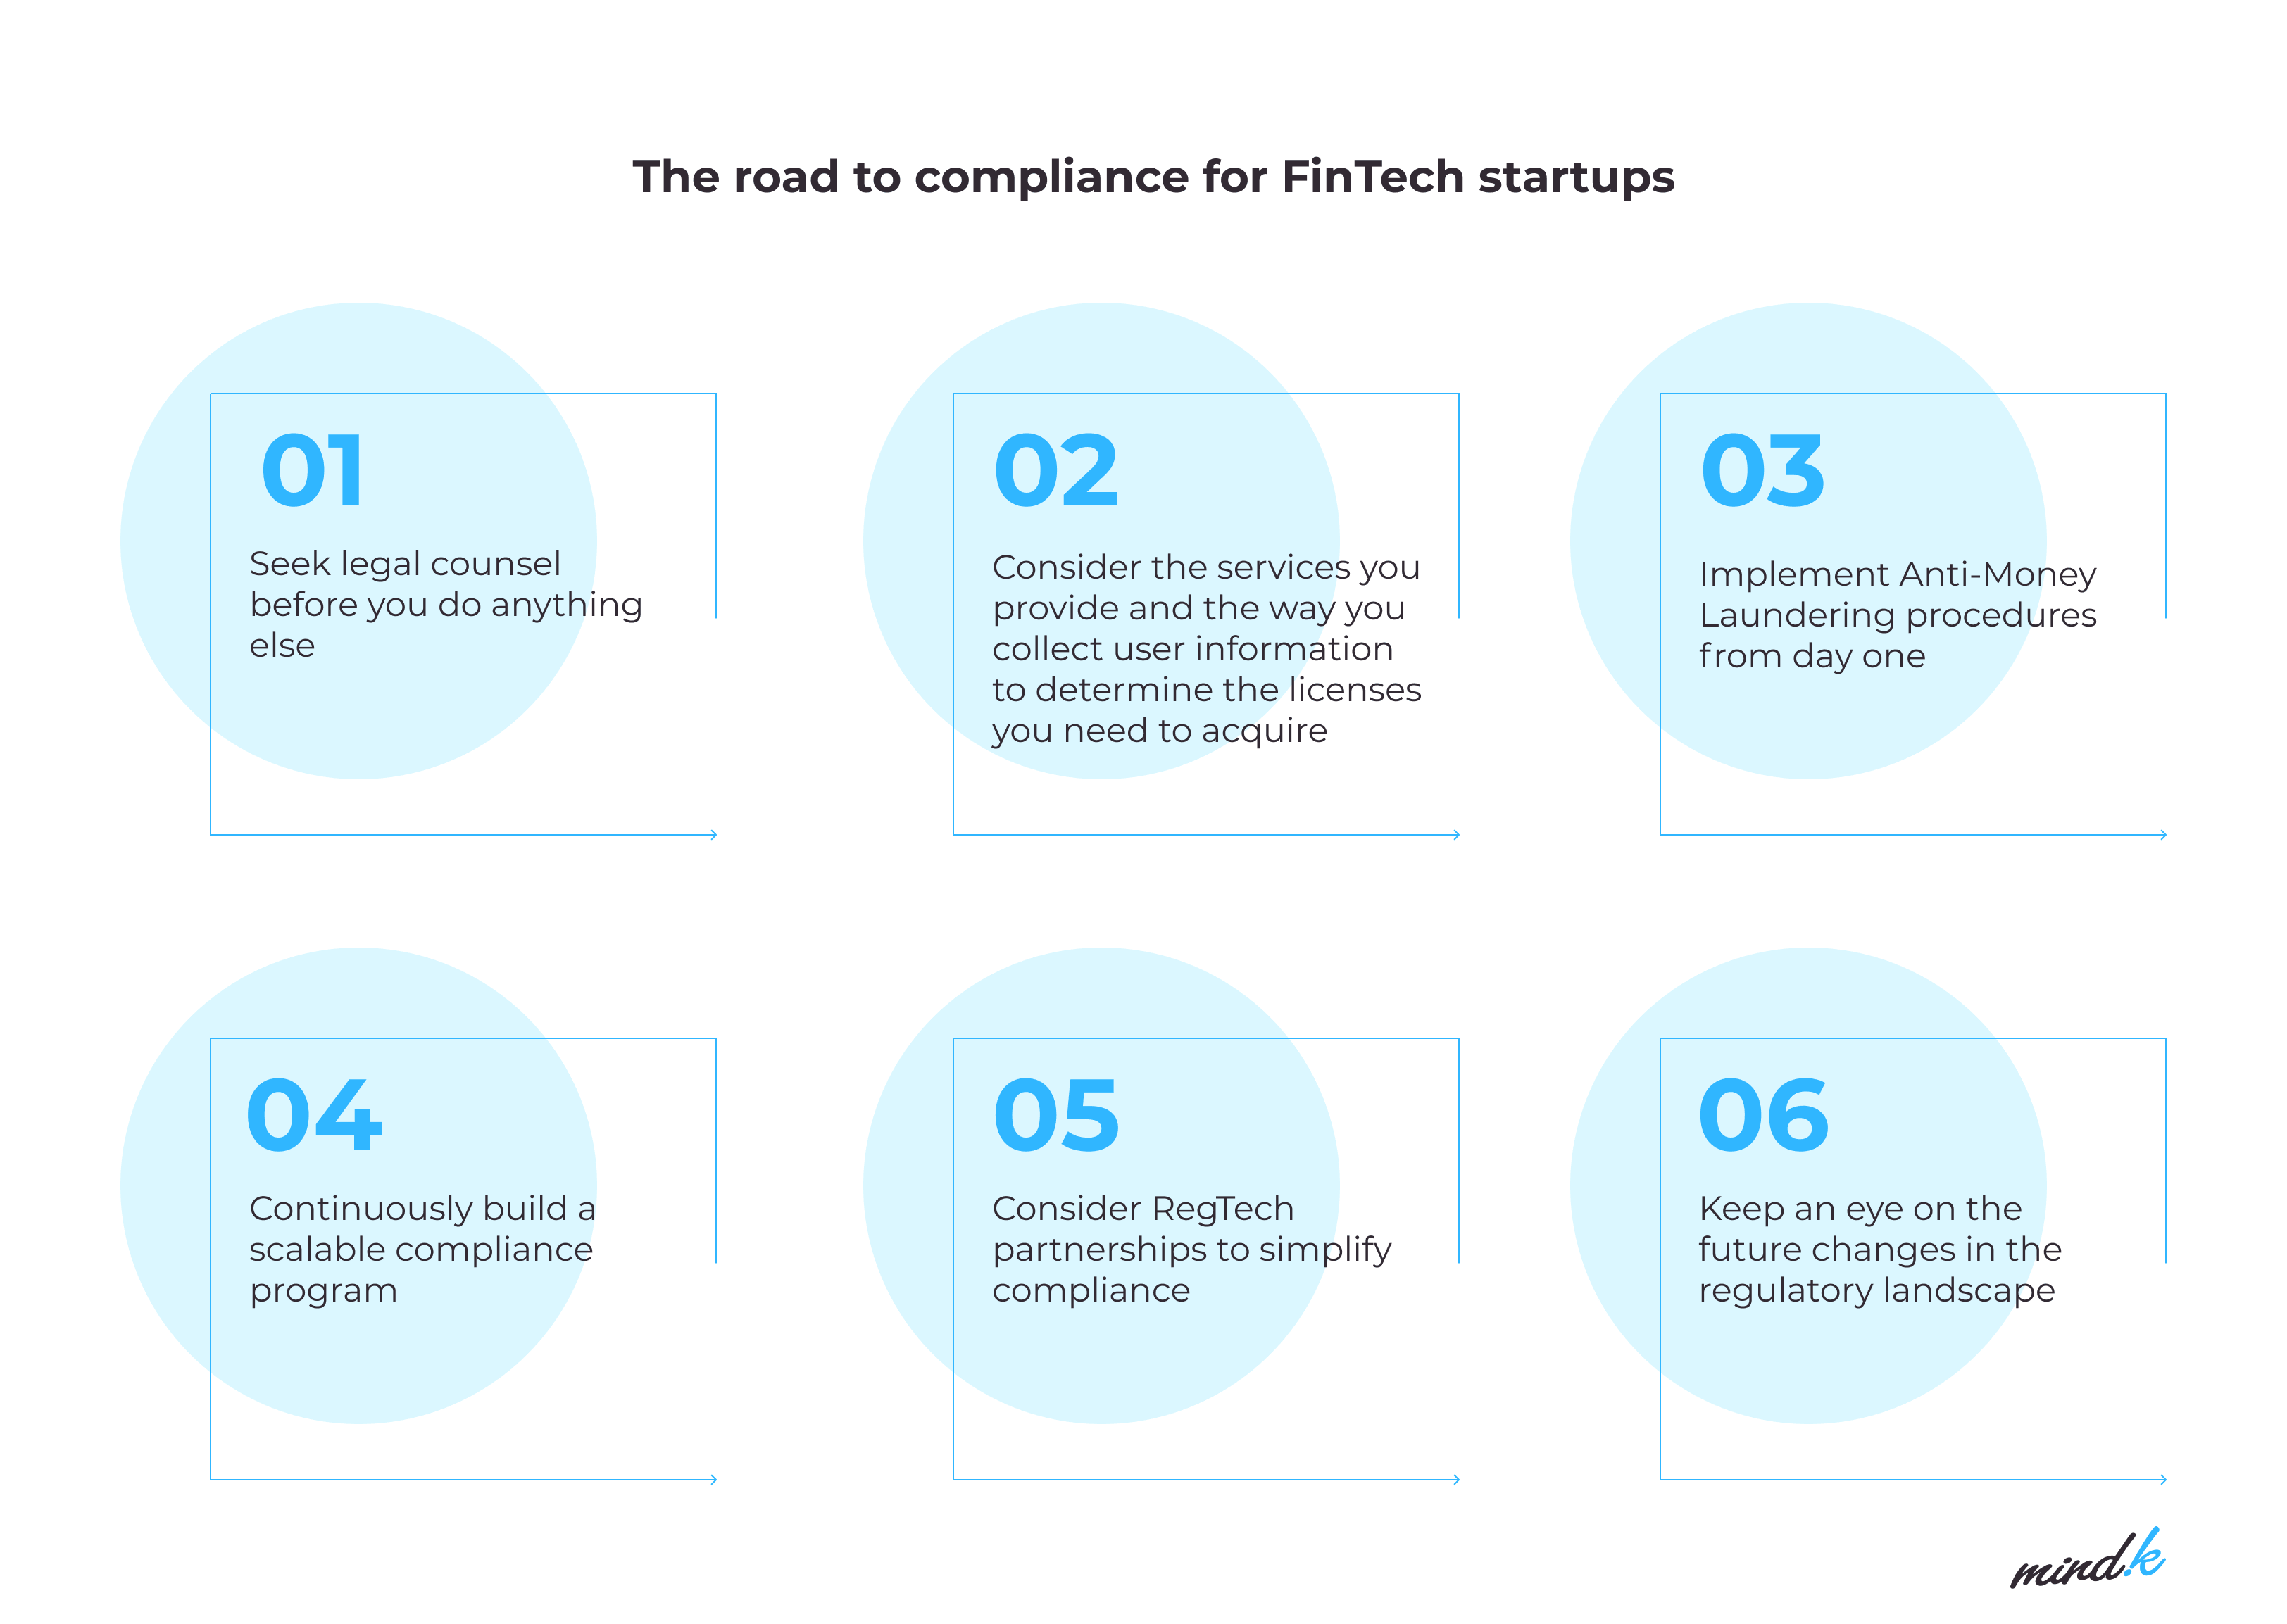 The road to fintech compliance